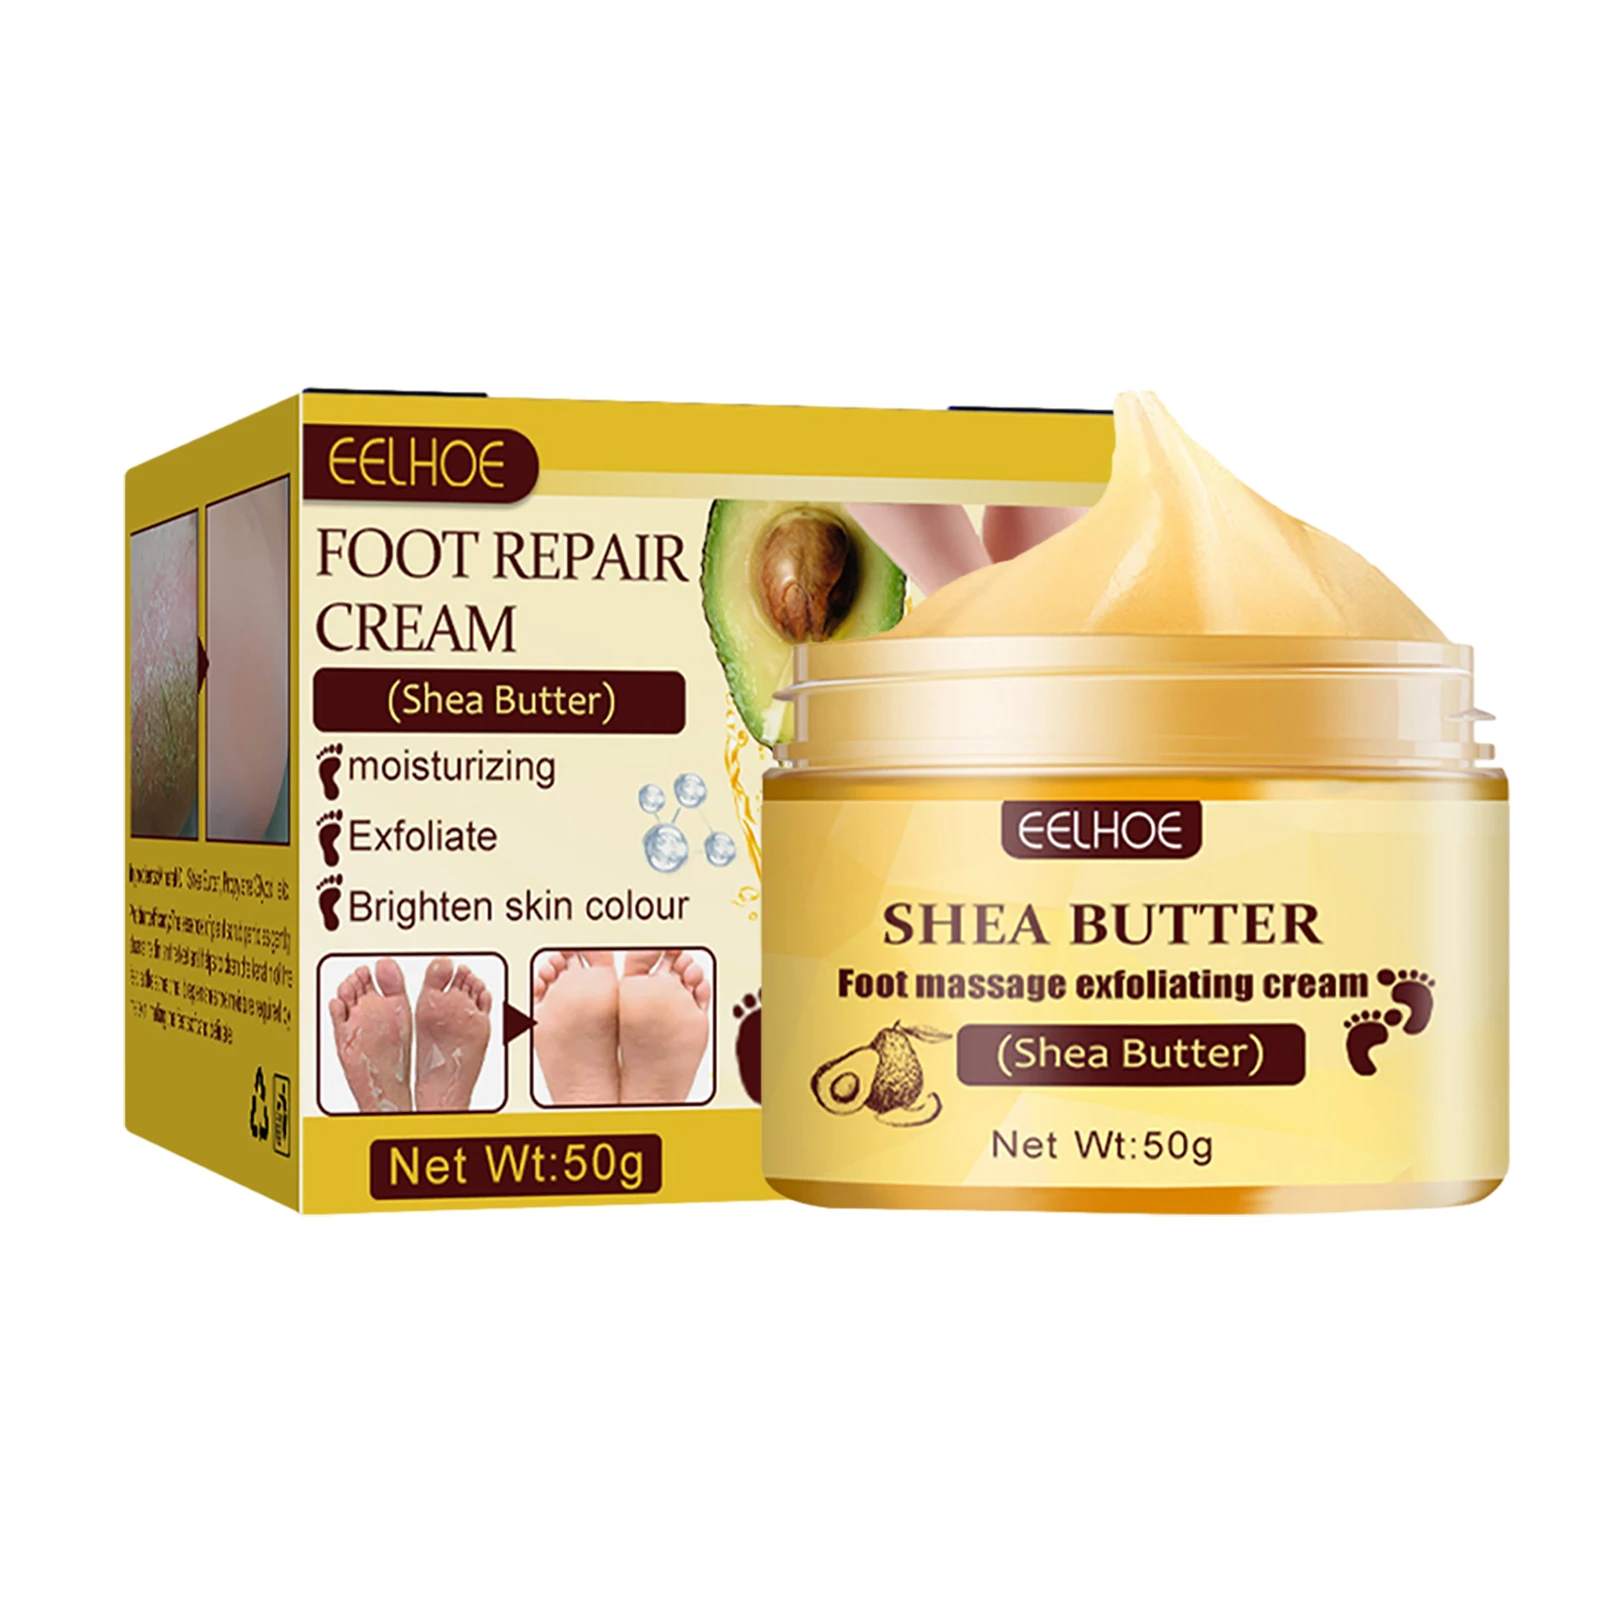 

Moisturizing Foot Cream Feet Cream For Extremely Dry Cracked Feet Foot Cream For Cracked Heels And Dry Feet Callus Remover